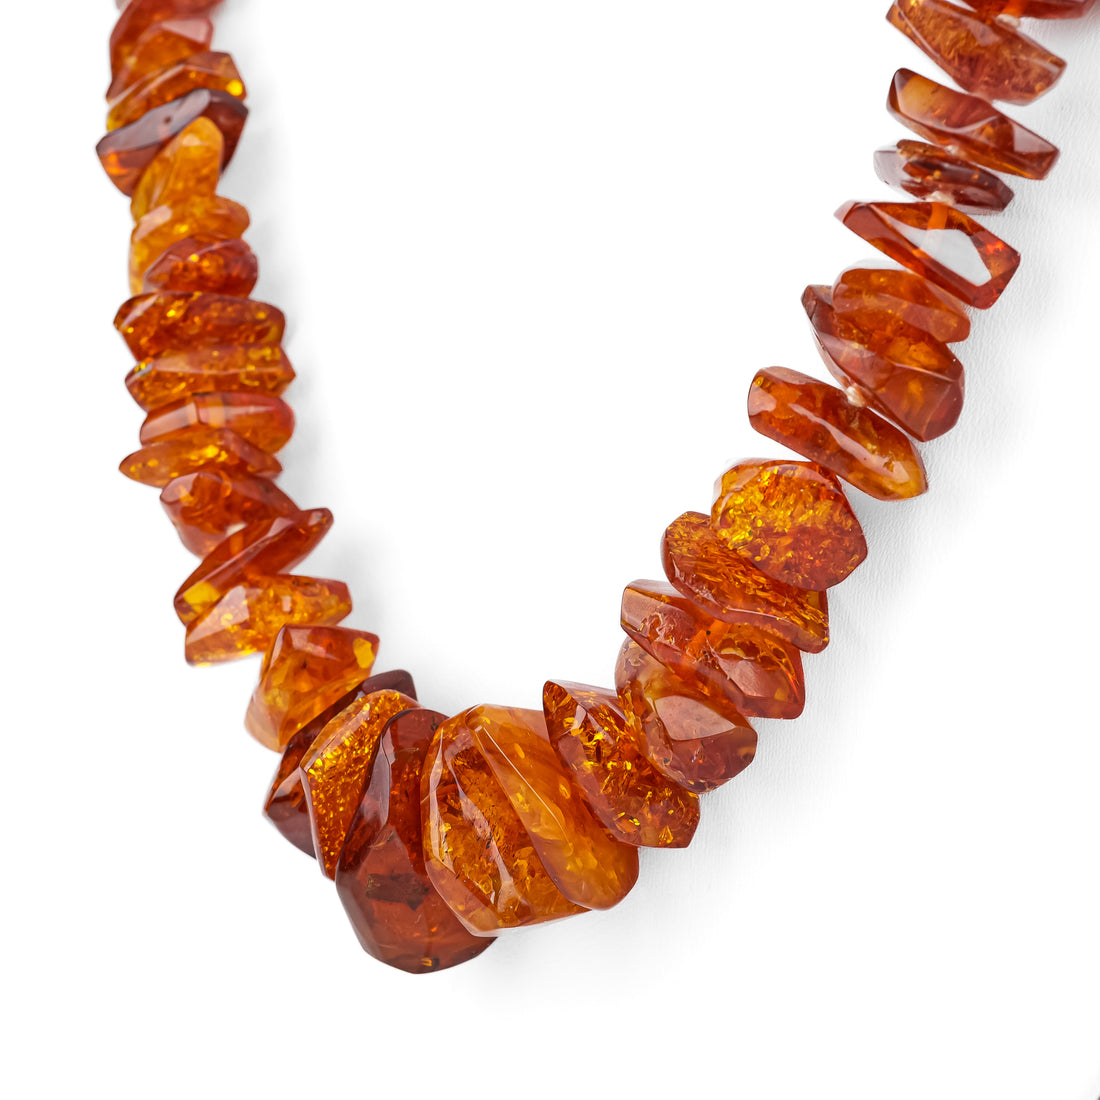 Graduated Amber Large Chip Necklace